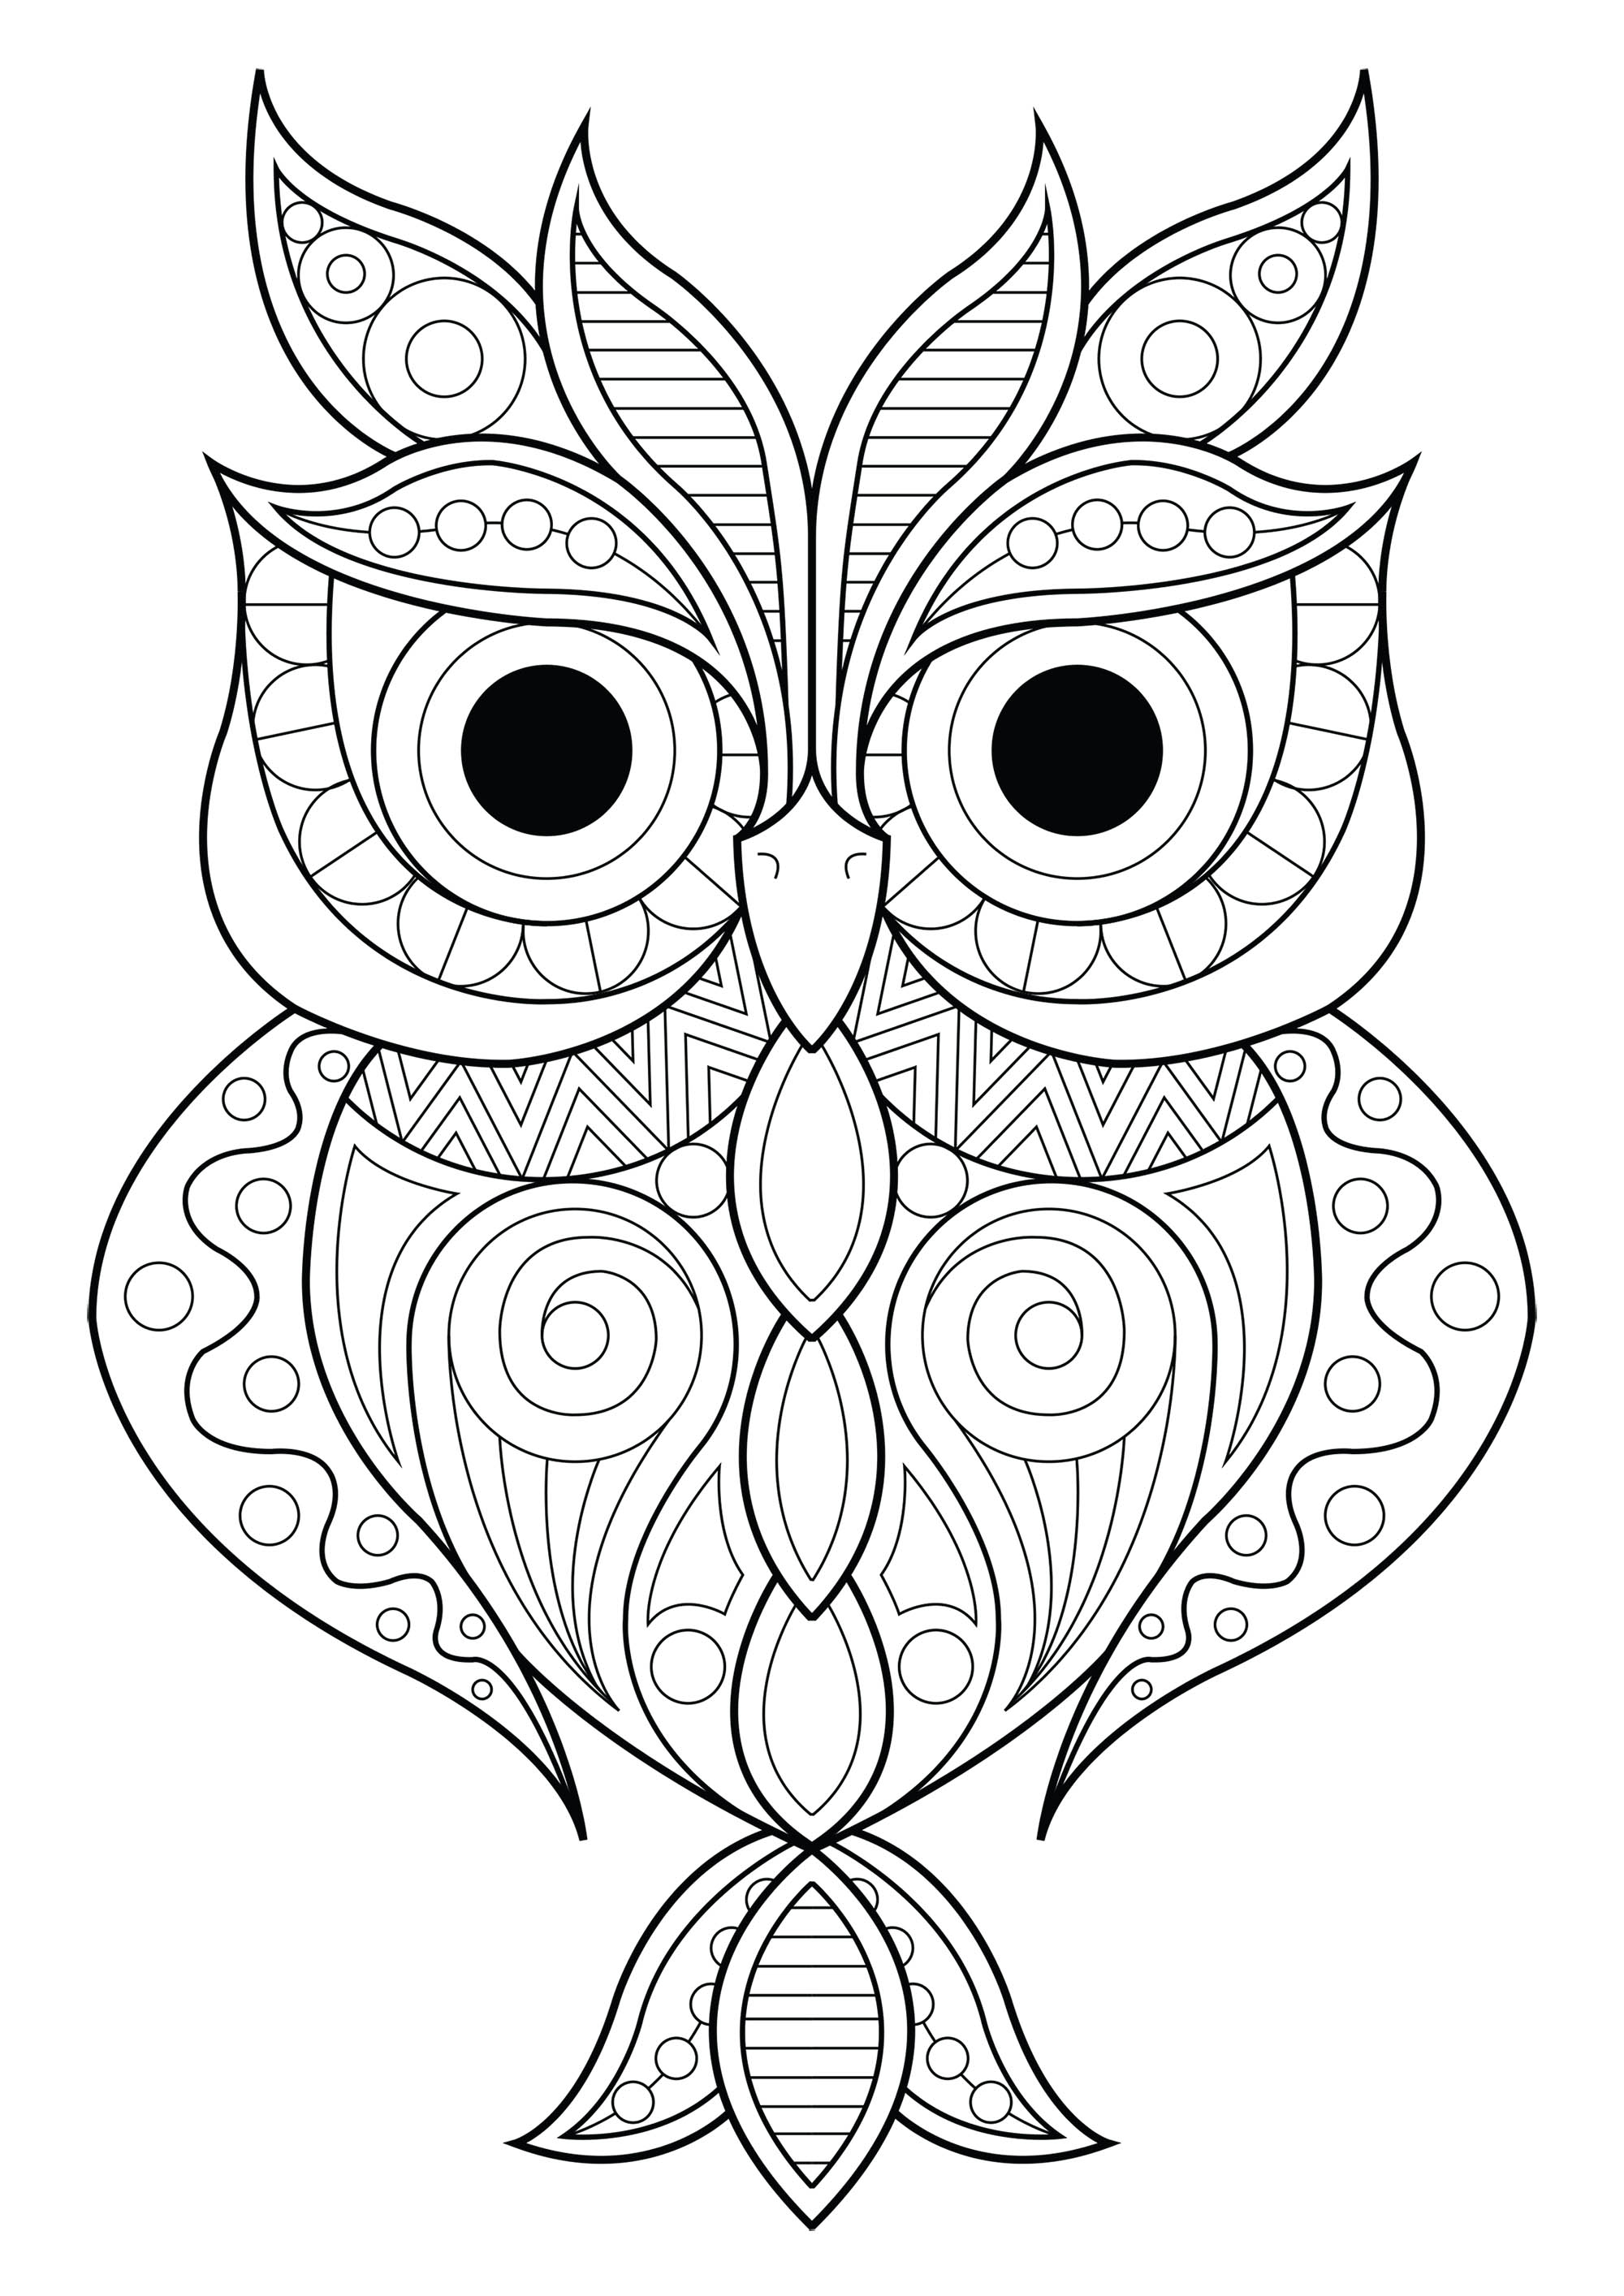 Owl with various different patterns